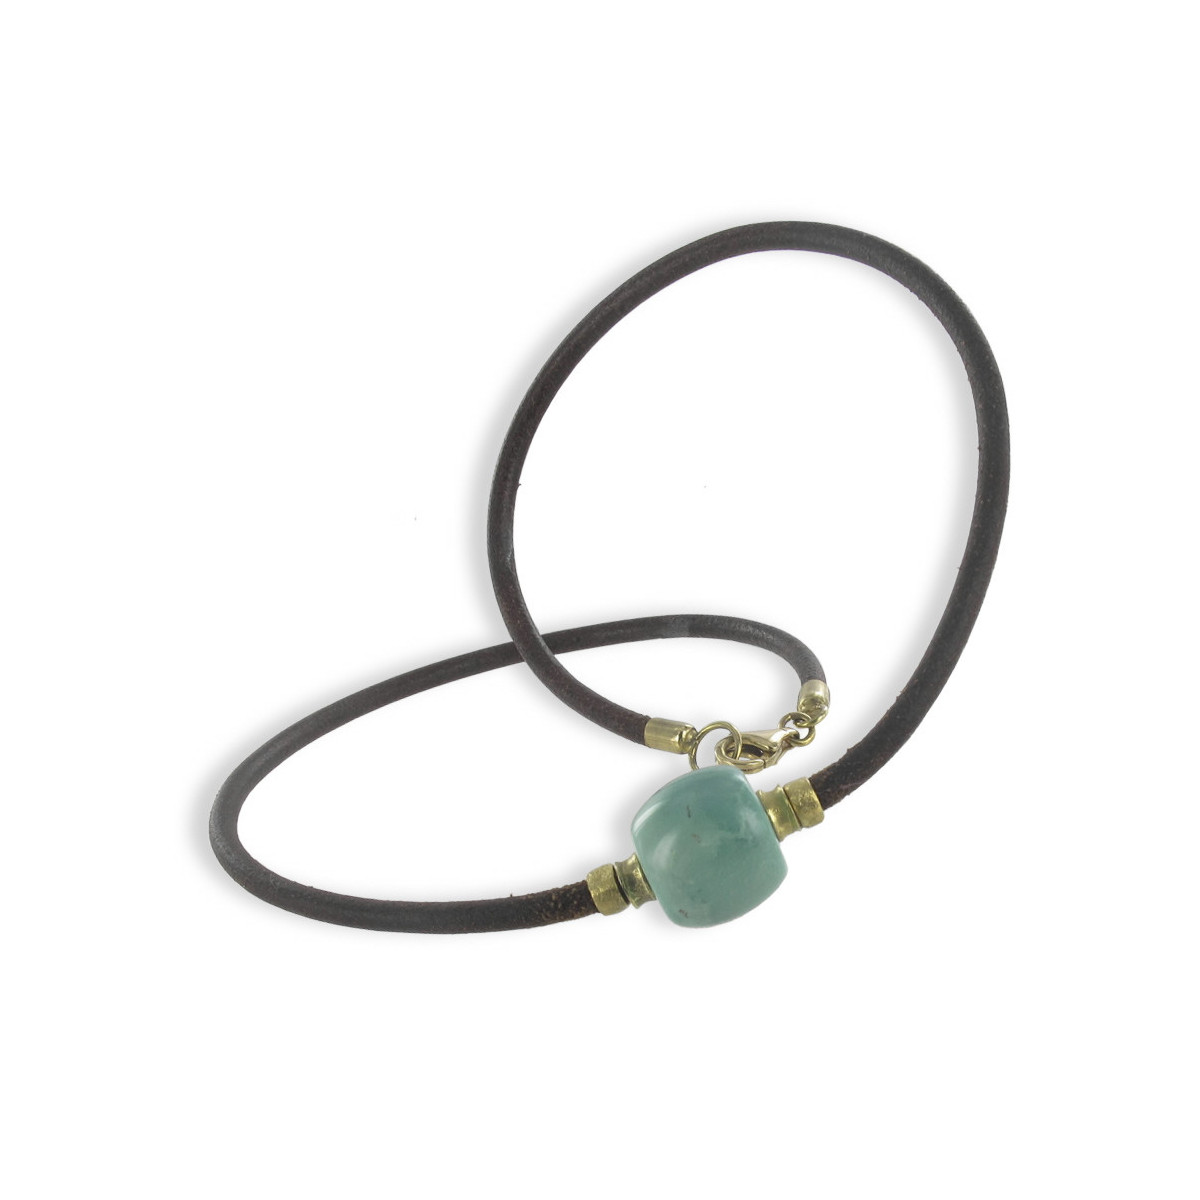 SHORT LEATHER NECKLACE WITH TURQUOISE